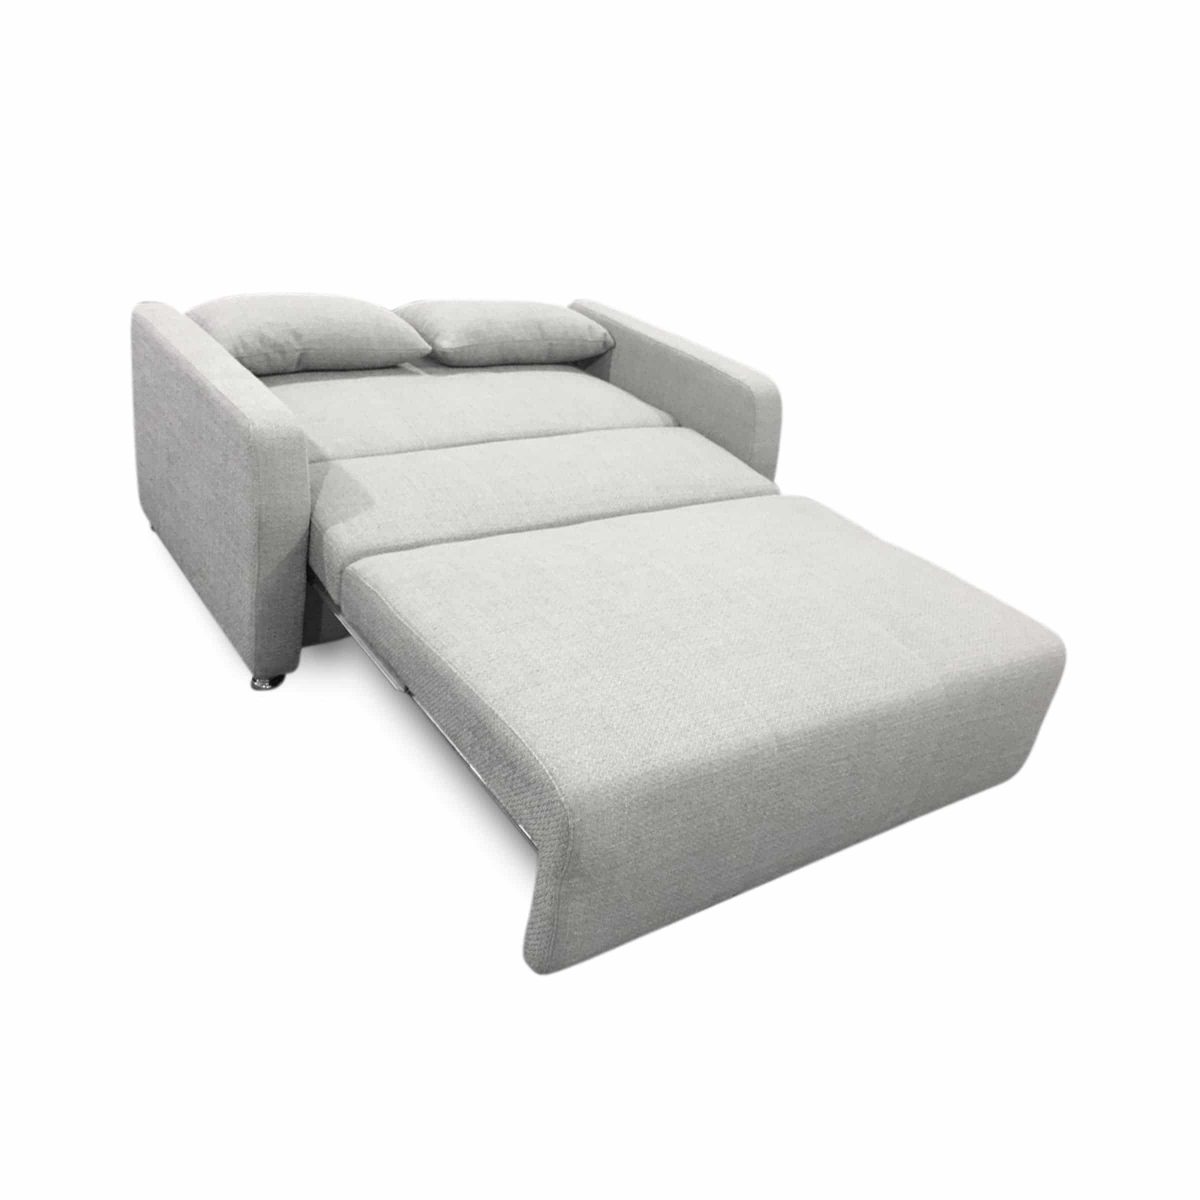 The Talia Double Sofa Bed With